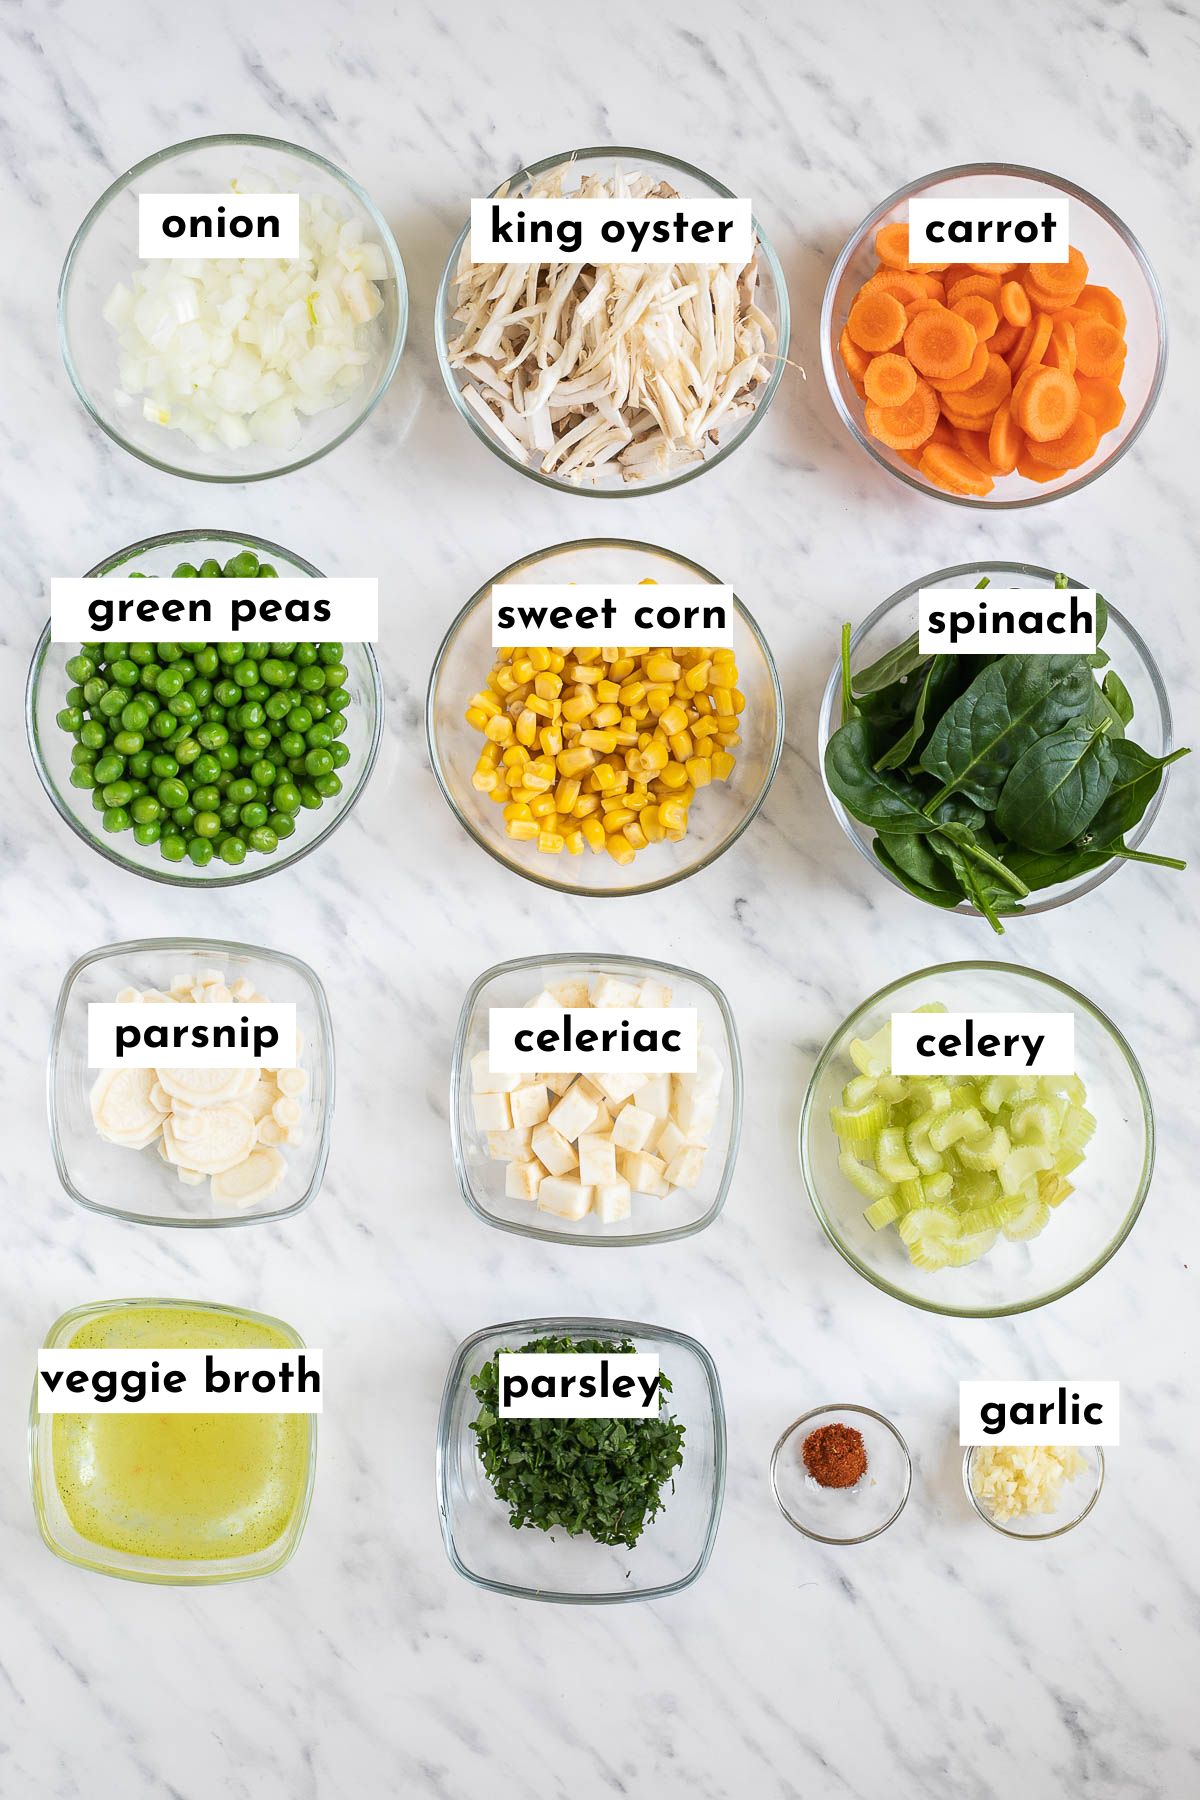 A glass bowl with the ingredients of the vegan chicken noodle soup like chopped onion, shredded mushrooms, sliced carrots, green peas, corn, spinach leaves, parsnip, celeriac, celery, veggie broth, parsley. 